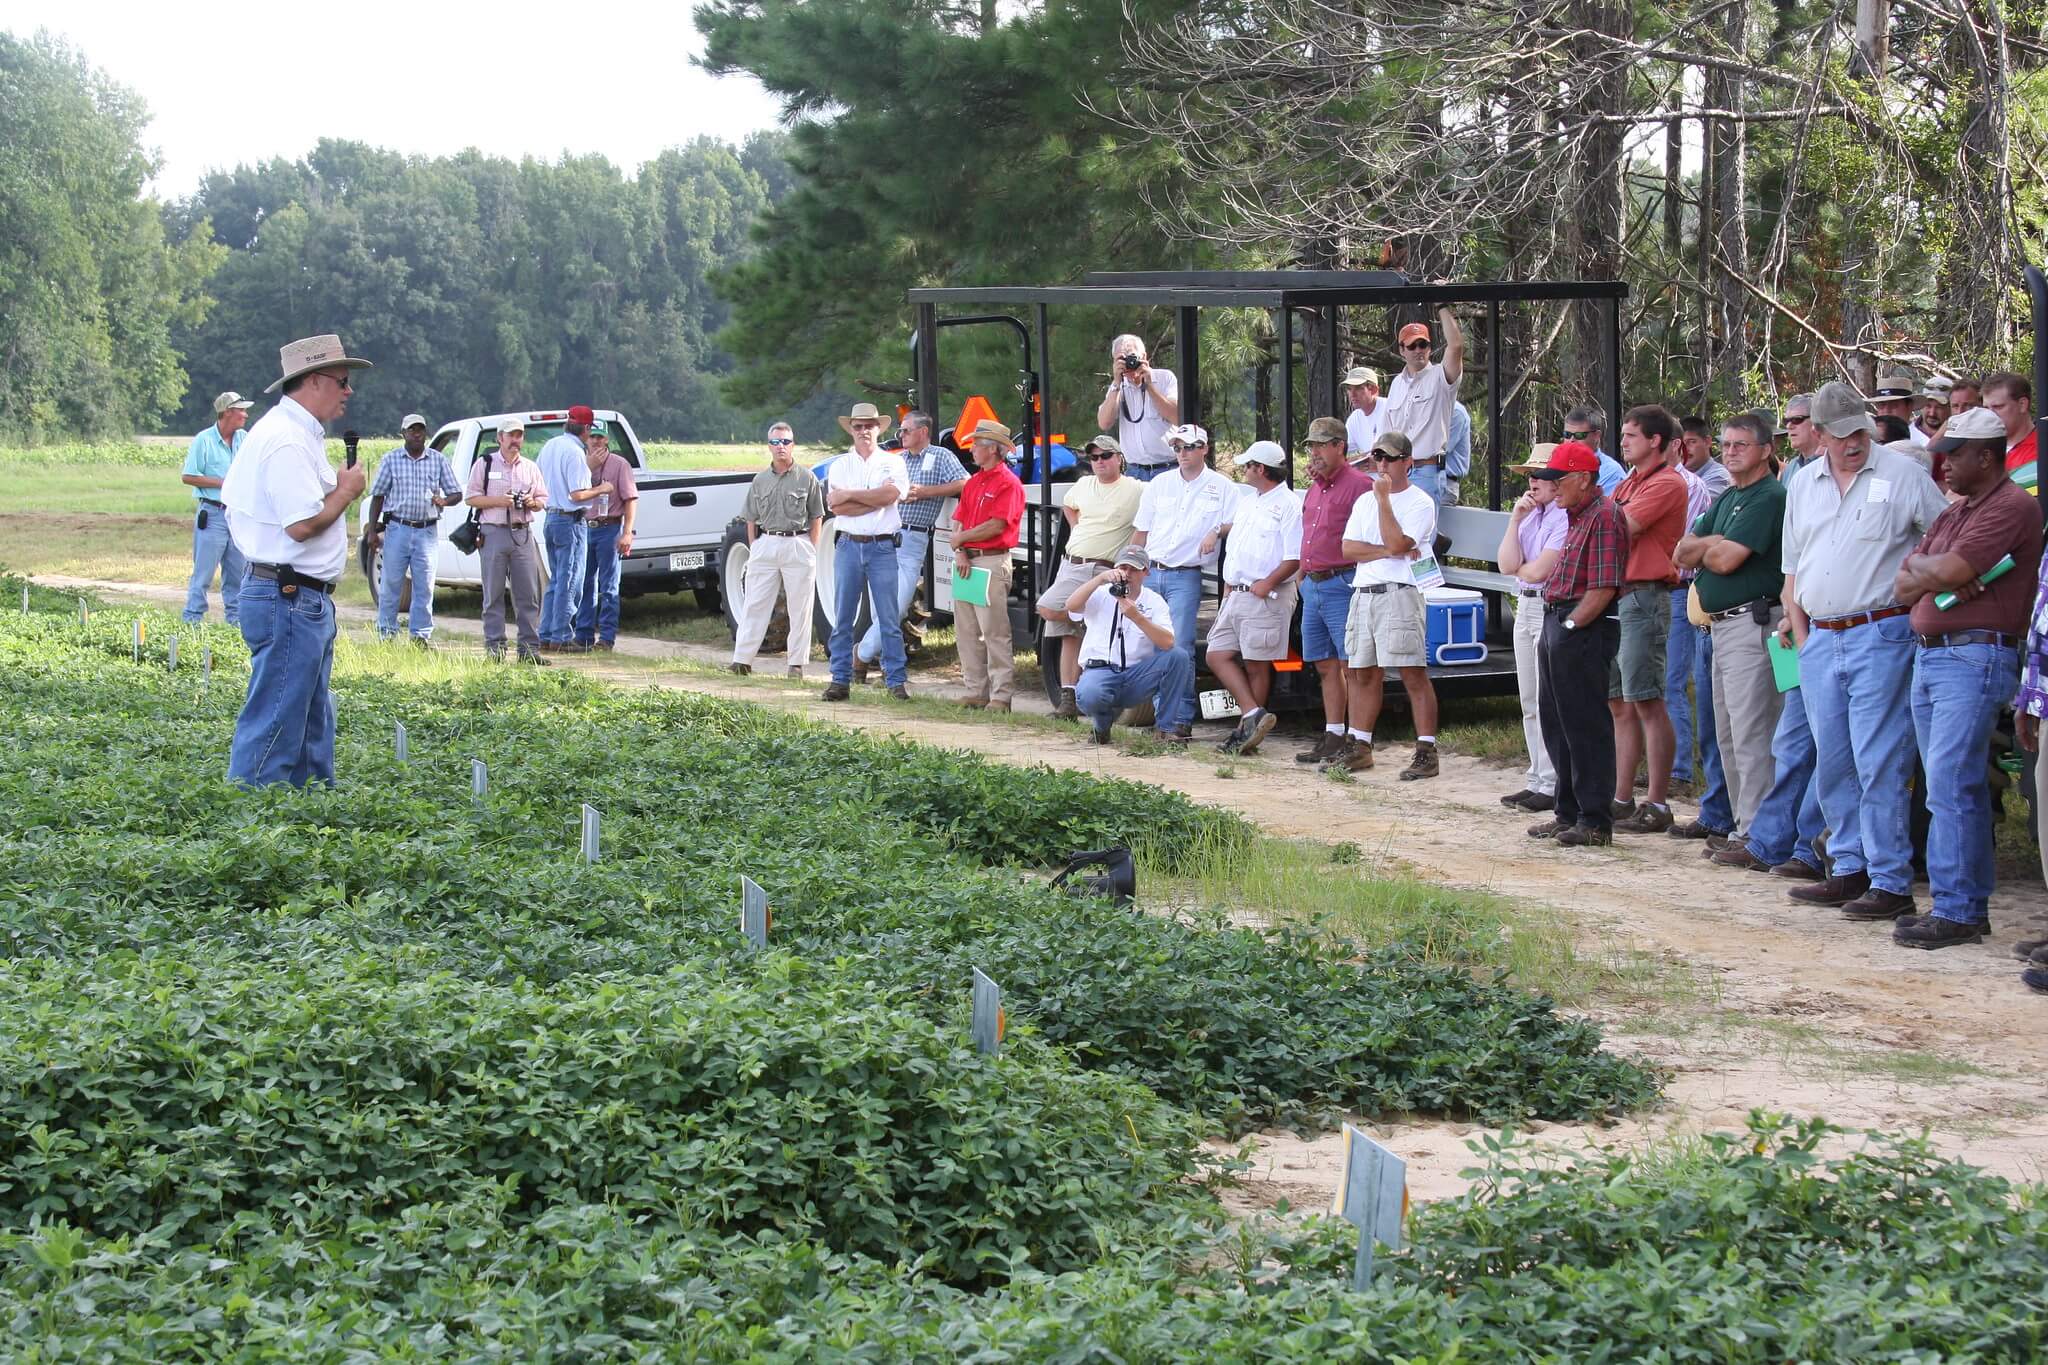 UGA's Southeast Research and Education Center will host its annual field day from 9 a.m. to 3 p.m. Wednesday, Aug. 10. The 720-acre facility has over 60 ongoing research projects, with an emphasis on the efficient use of water.